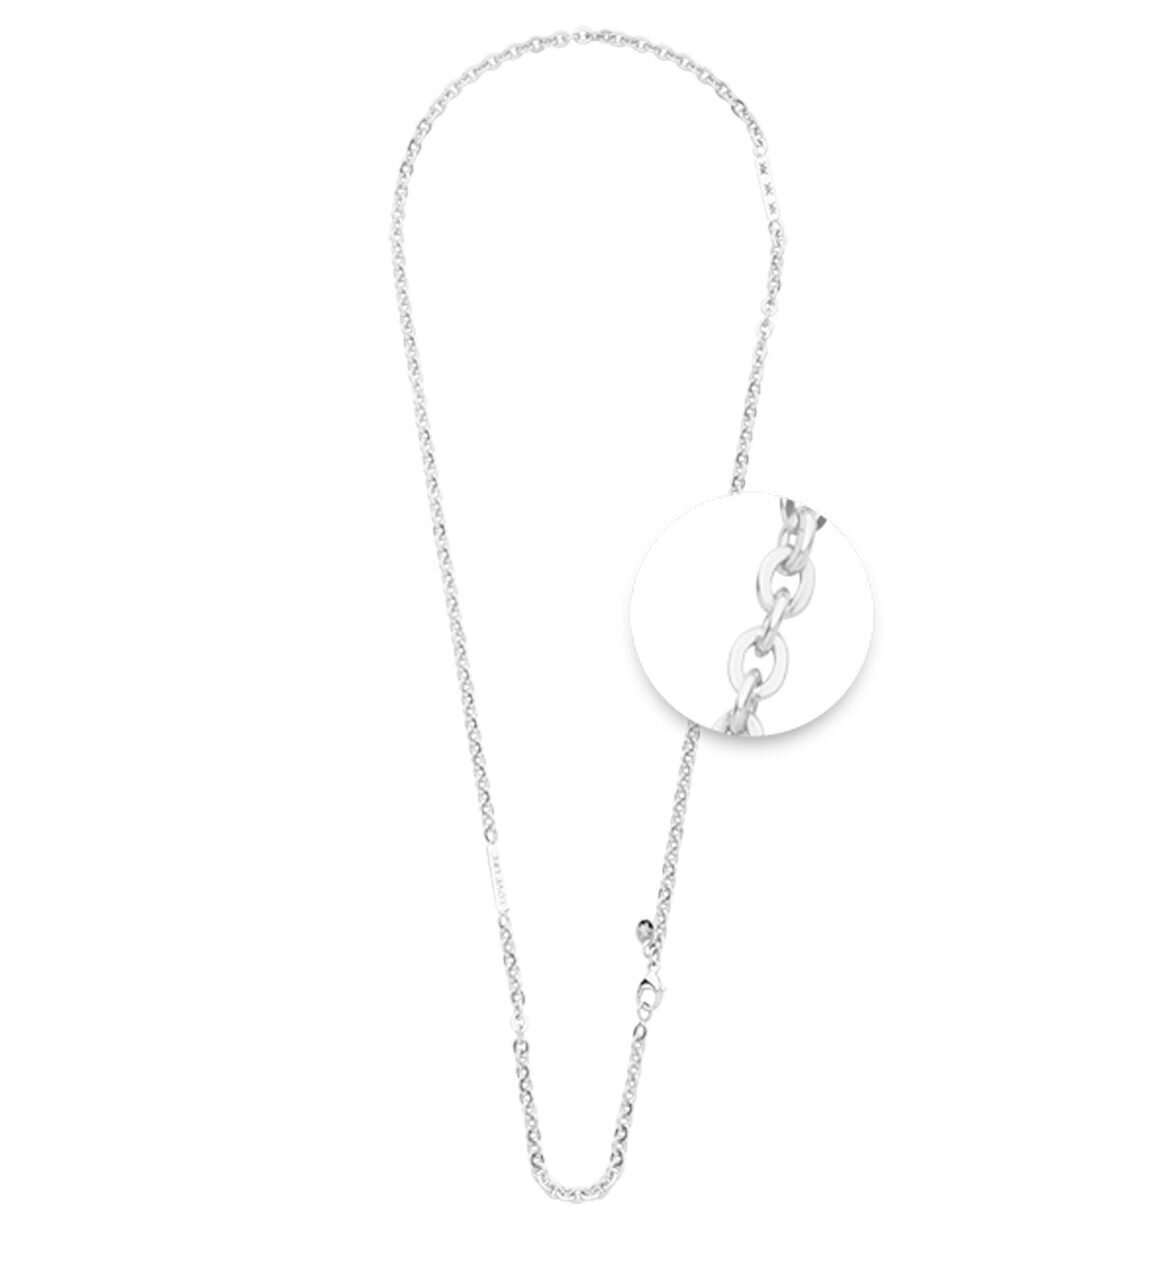 Nikki Lissoni Flattened Cable Chain 4 x 5mm with Statements Swarovski Stones Silver-plated 60cm N1028S60